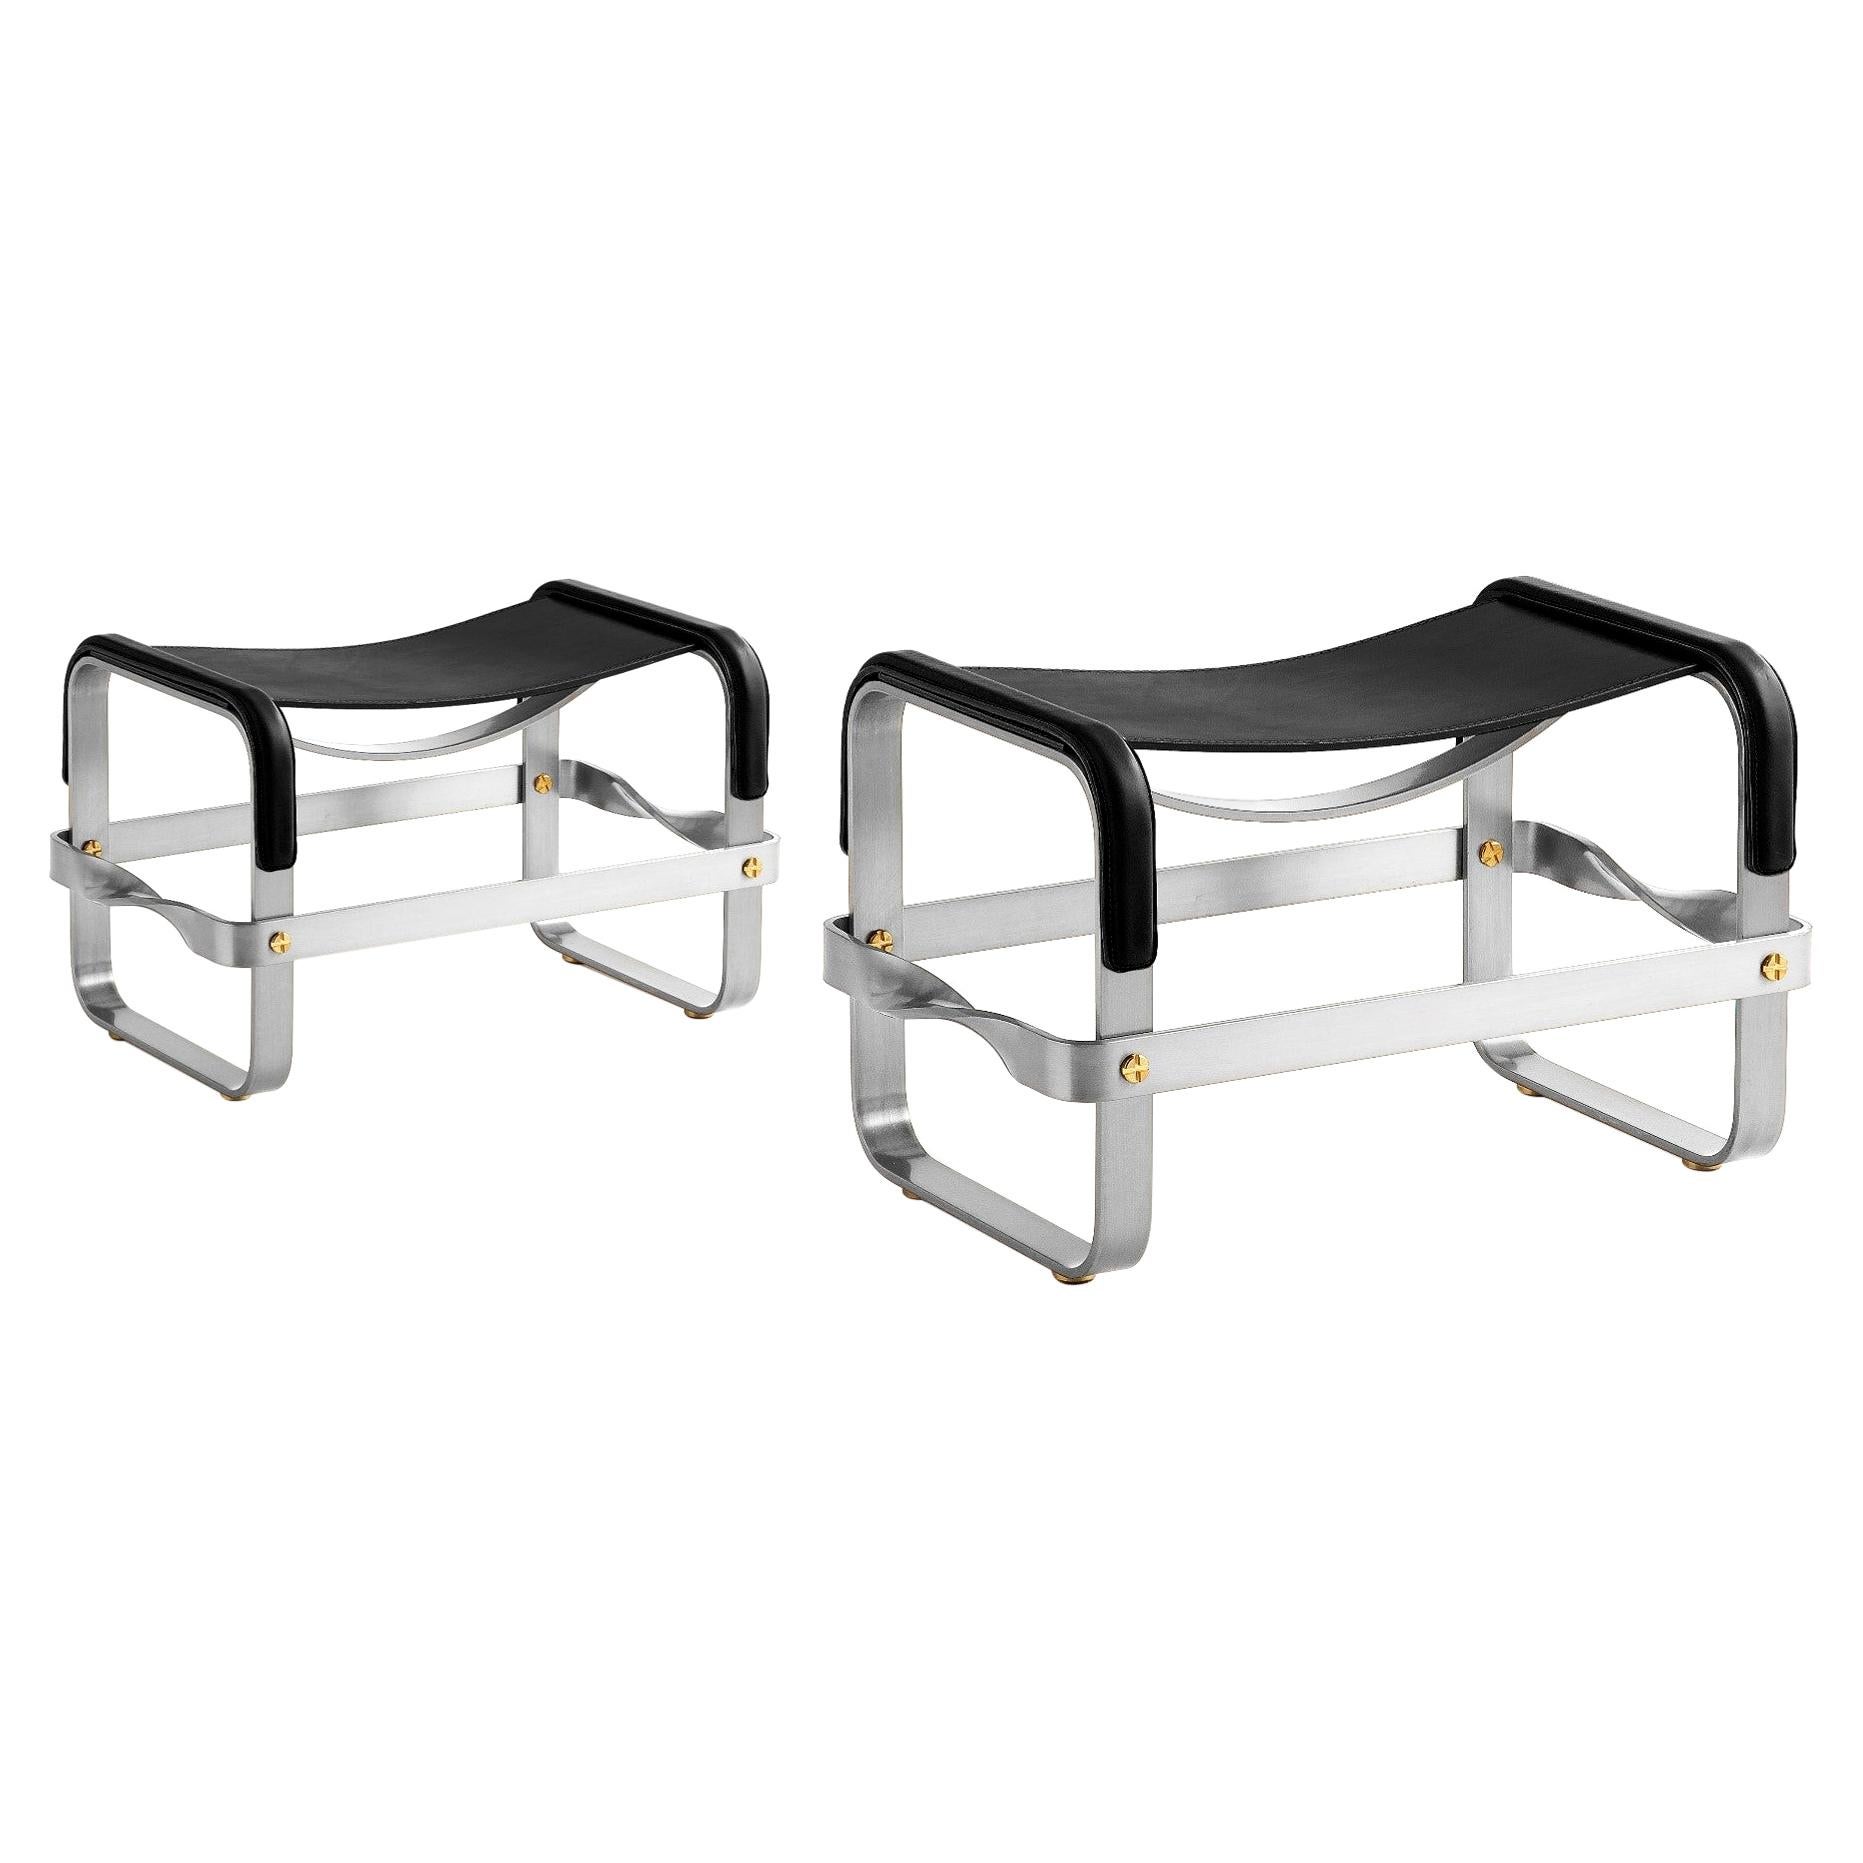 Set of 2 Footstool Old Silver Steel & Black Leather, Contemporary Style